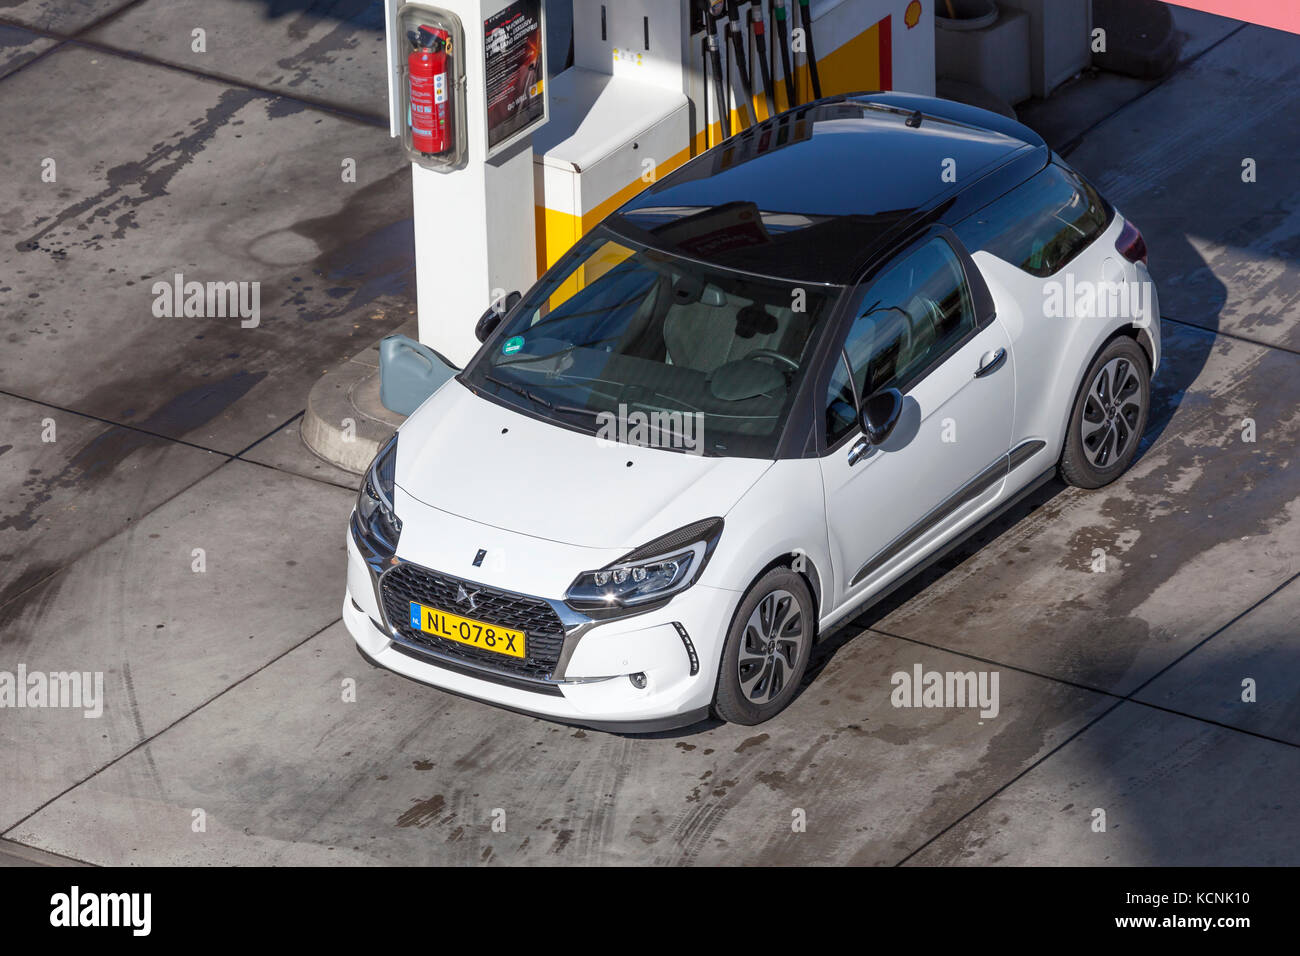 Frankfurt, Germany - Sep 19, 2017: White Citroen DS3 with a black roof on the petrol station in Germany Stock Photo